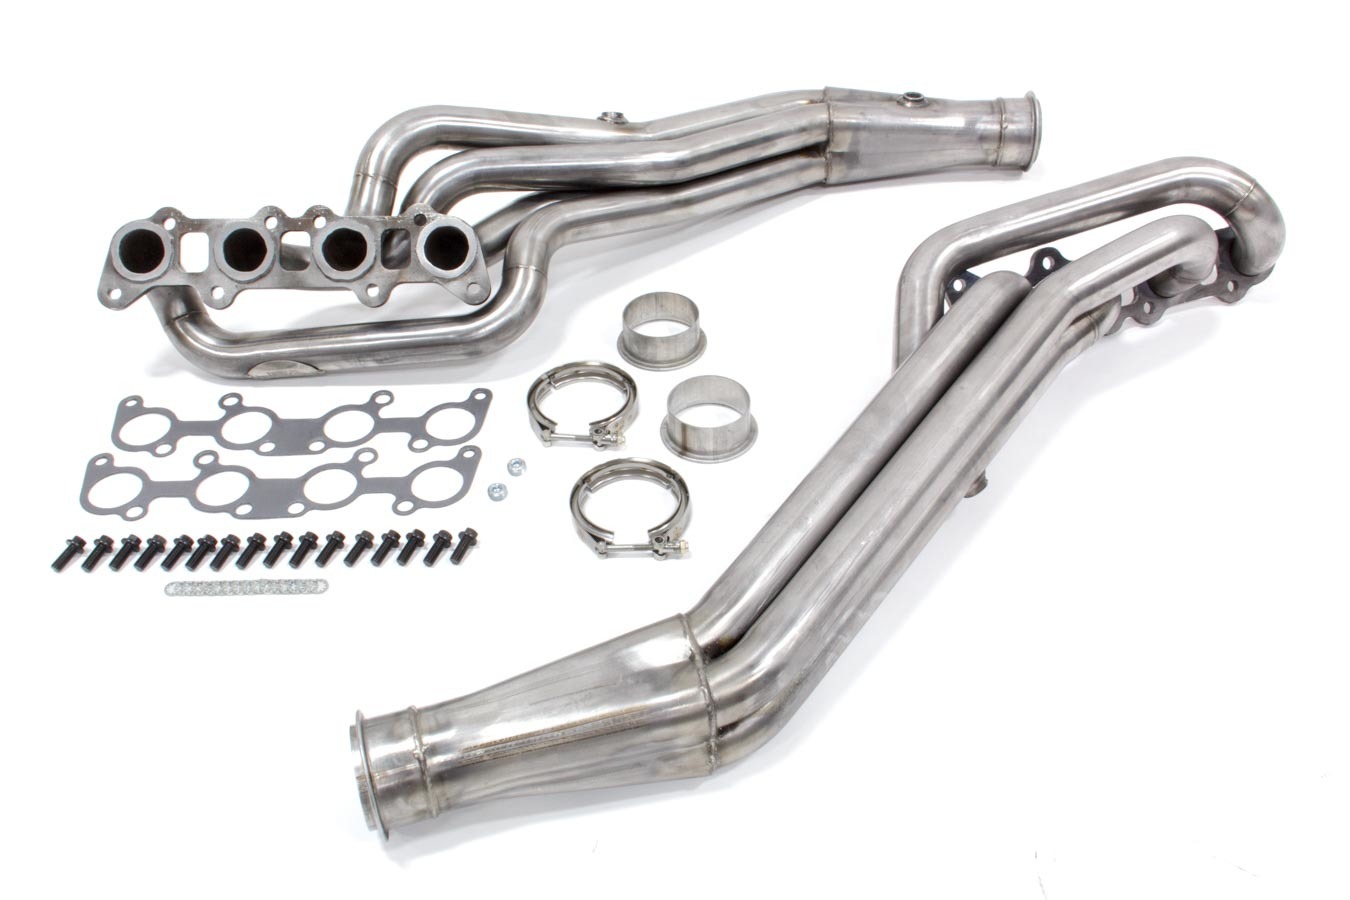 JBA Headers Headers, Long Tube, 1-7/8" Primary, 3" Collector, Stainless, Natural, Ford Coyote, Ford Mustang 2015-16, Kit